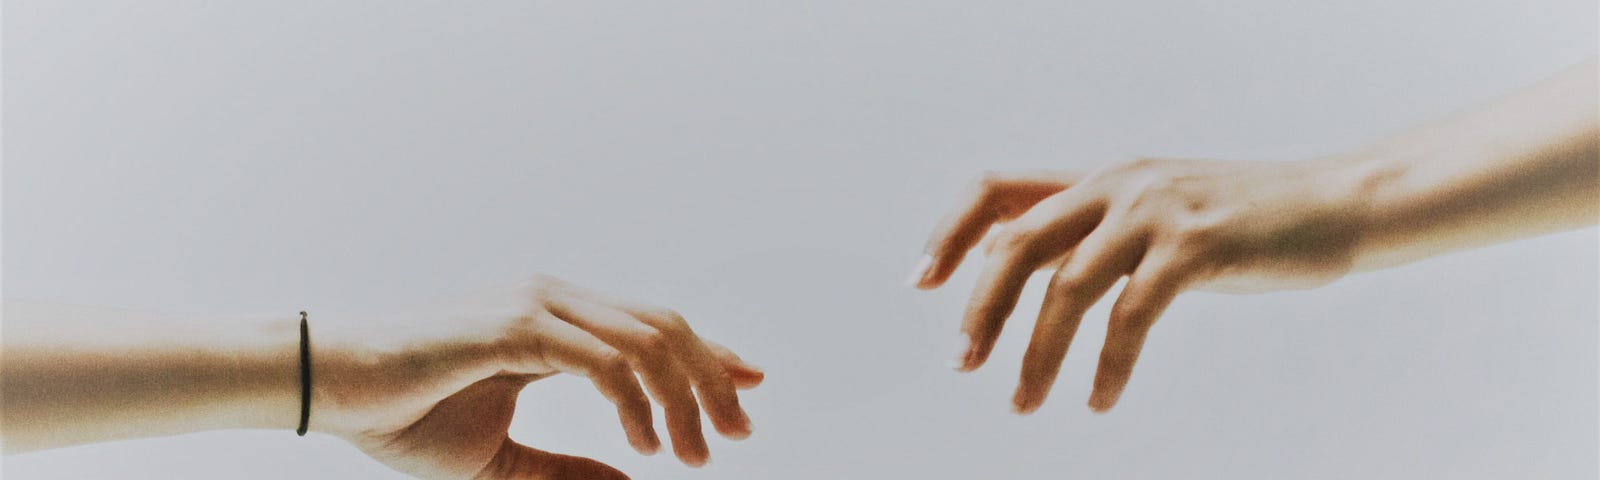 Two hands outstretch toward each other against a white canvas